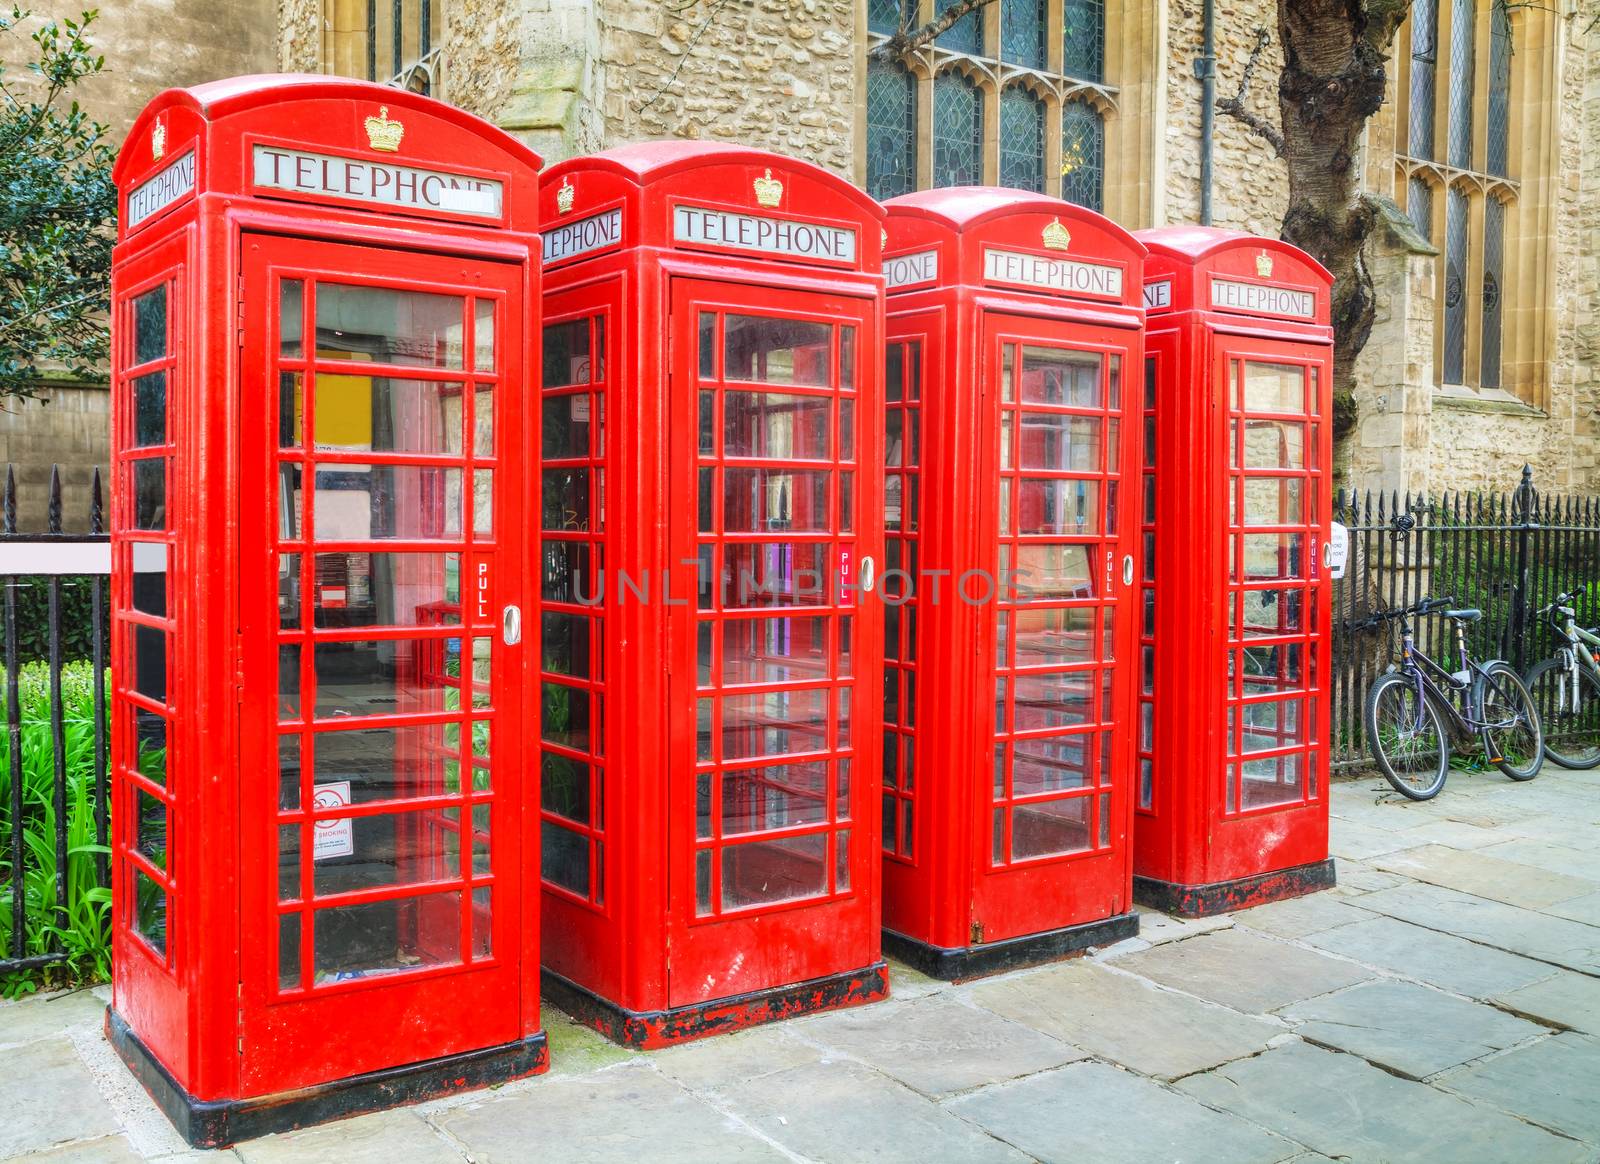 Famous red telephone booths in London by AndreyKr